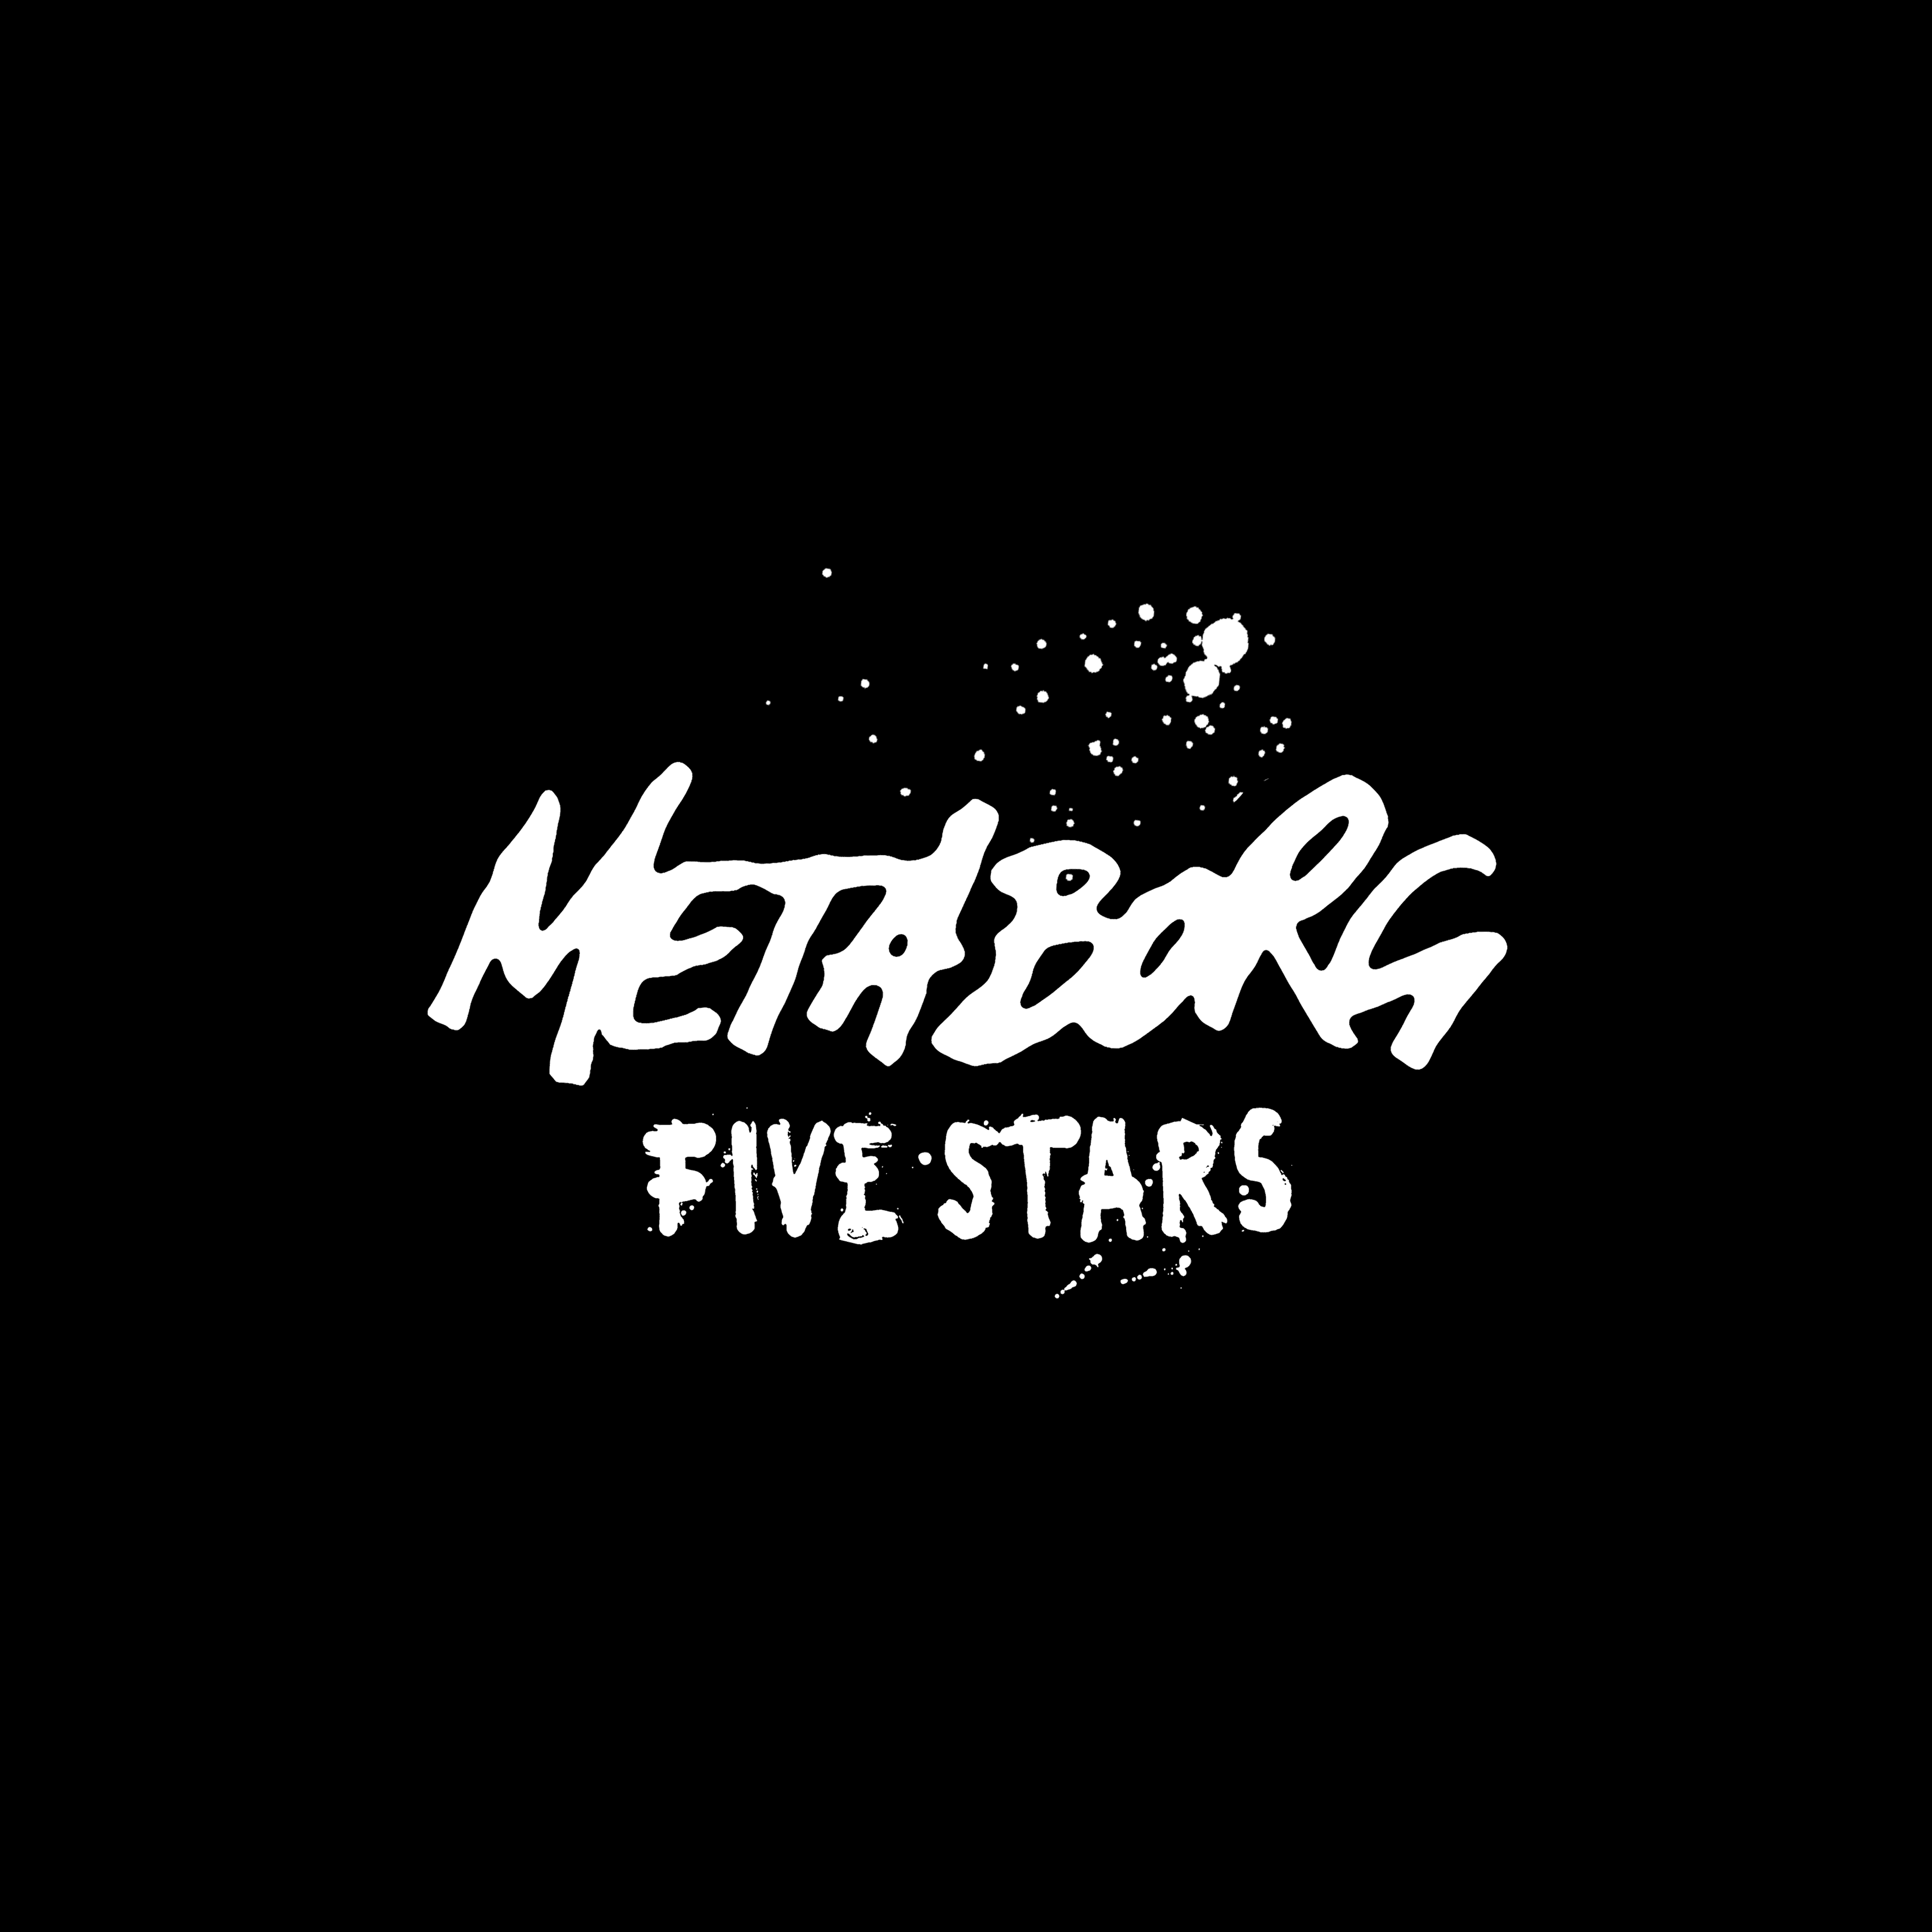 Metaborg Five Stars by Giovanni Motta